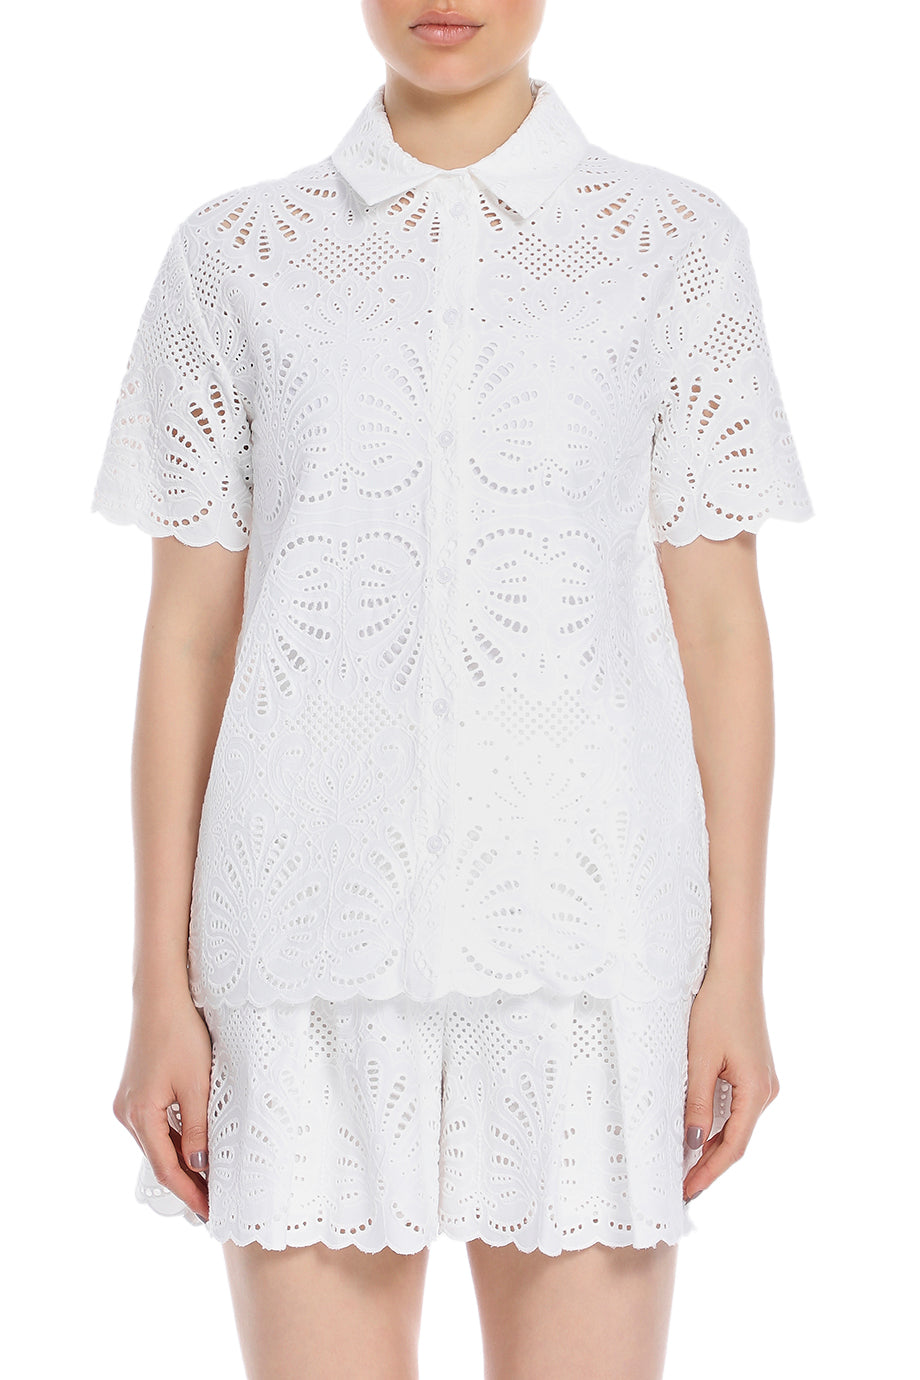 Cotton Embroidery Top